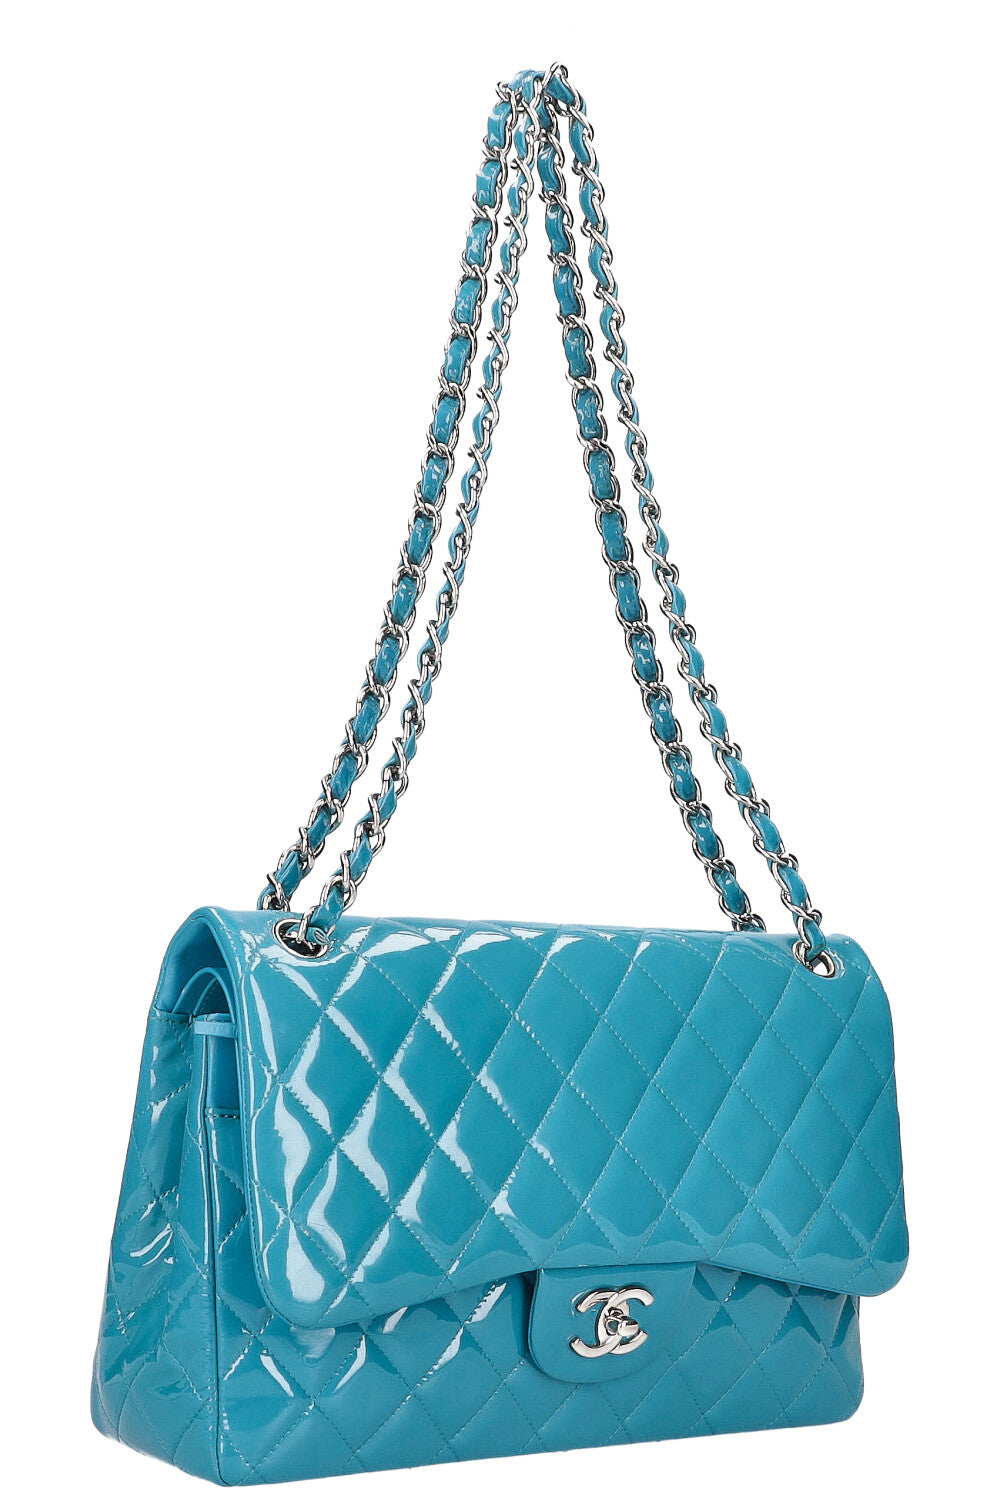 CHANEL Double Flap Bag Large Patent Leather Bright Blue